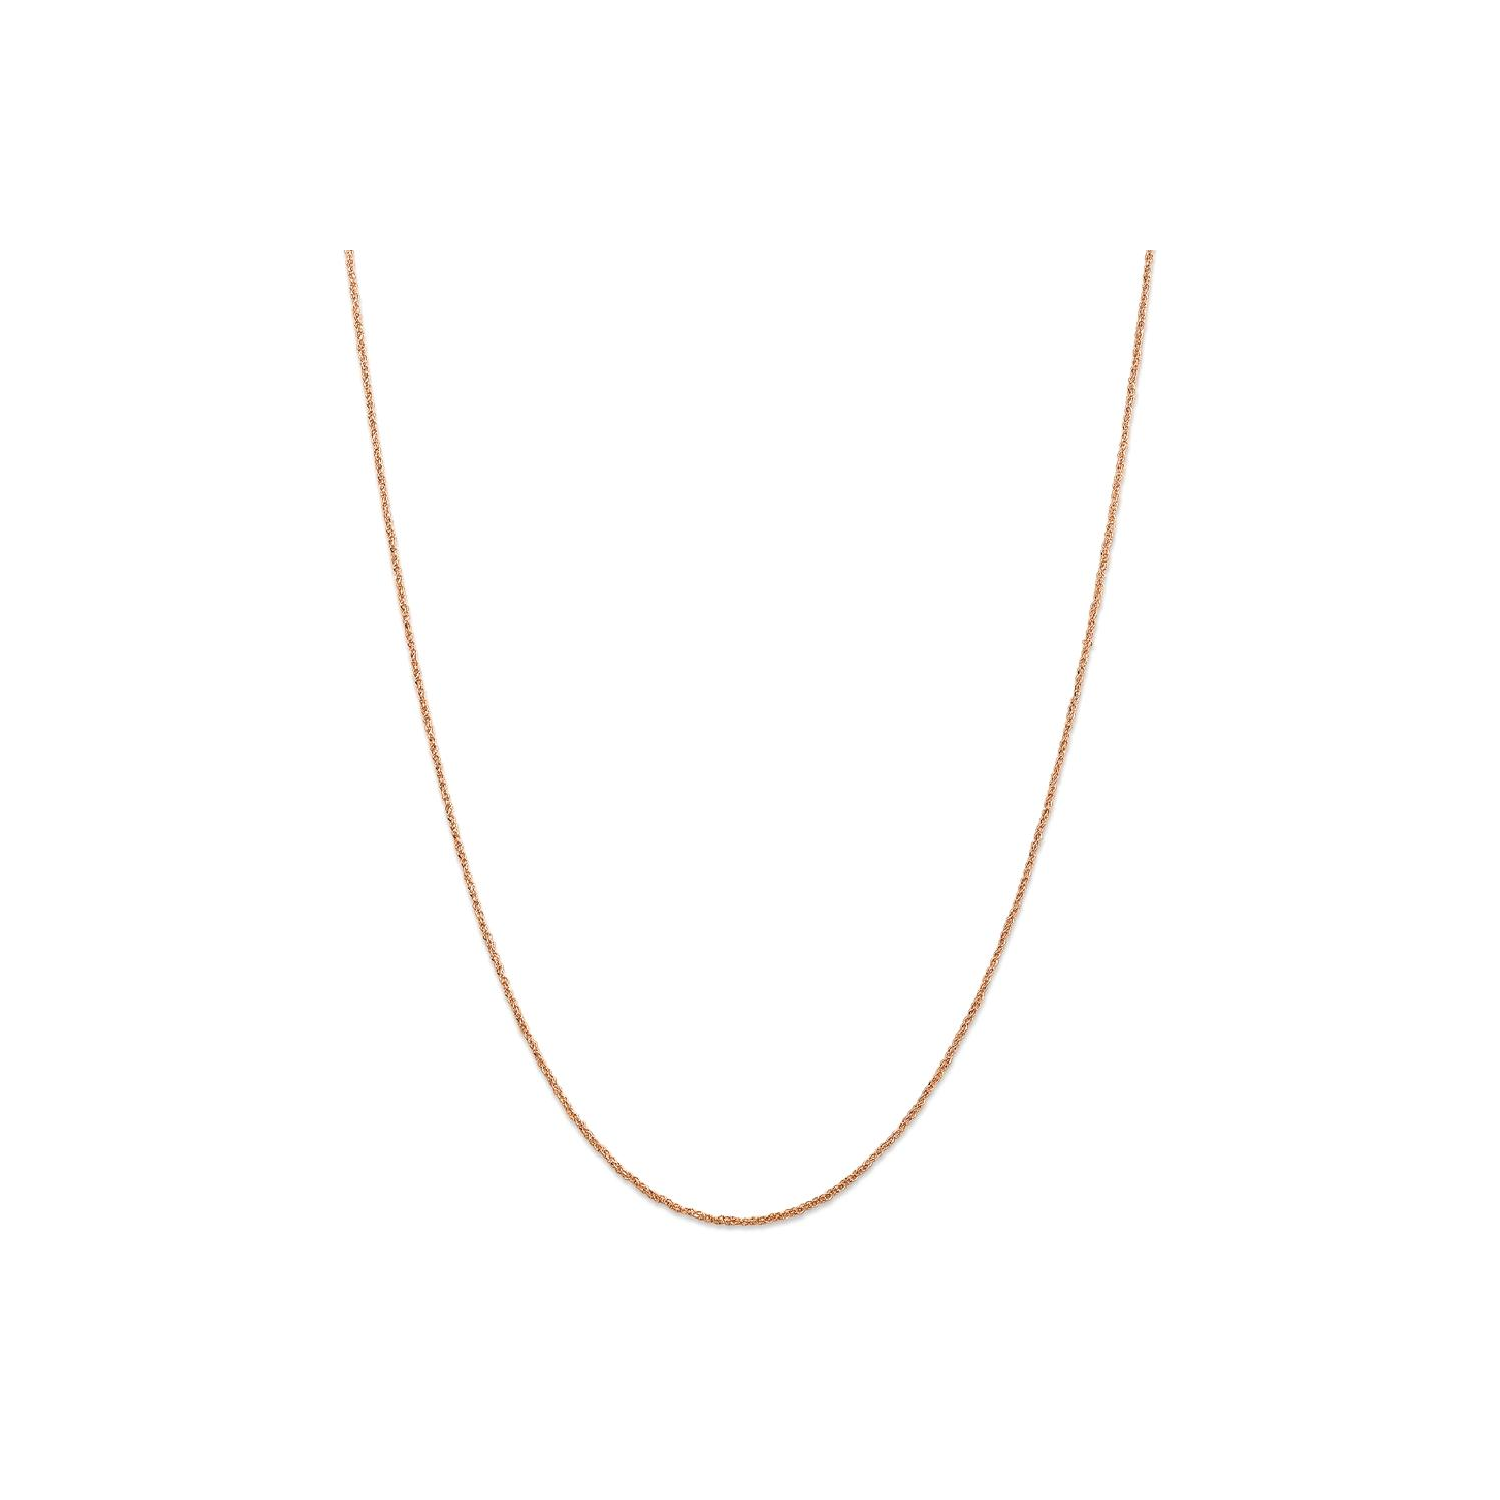 IceCarats 14k Rose Gold 1.1mm Ropa Chain Necklace 24 Inch